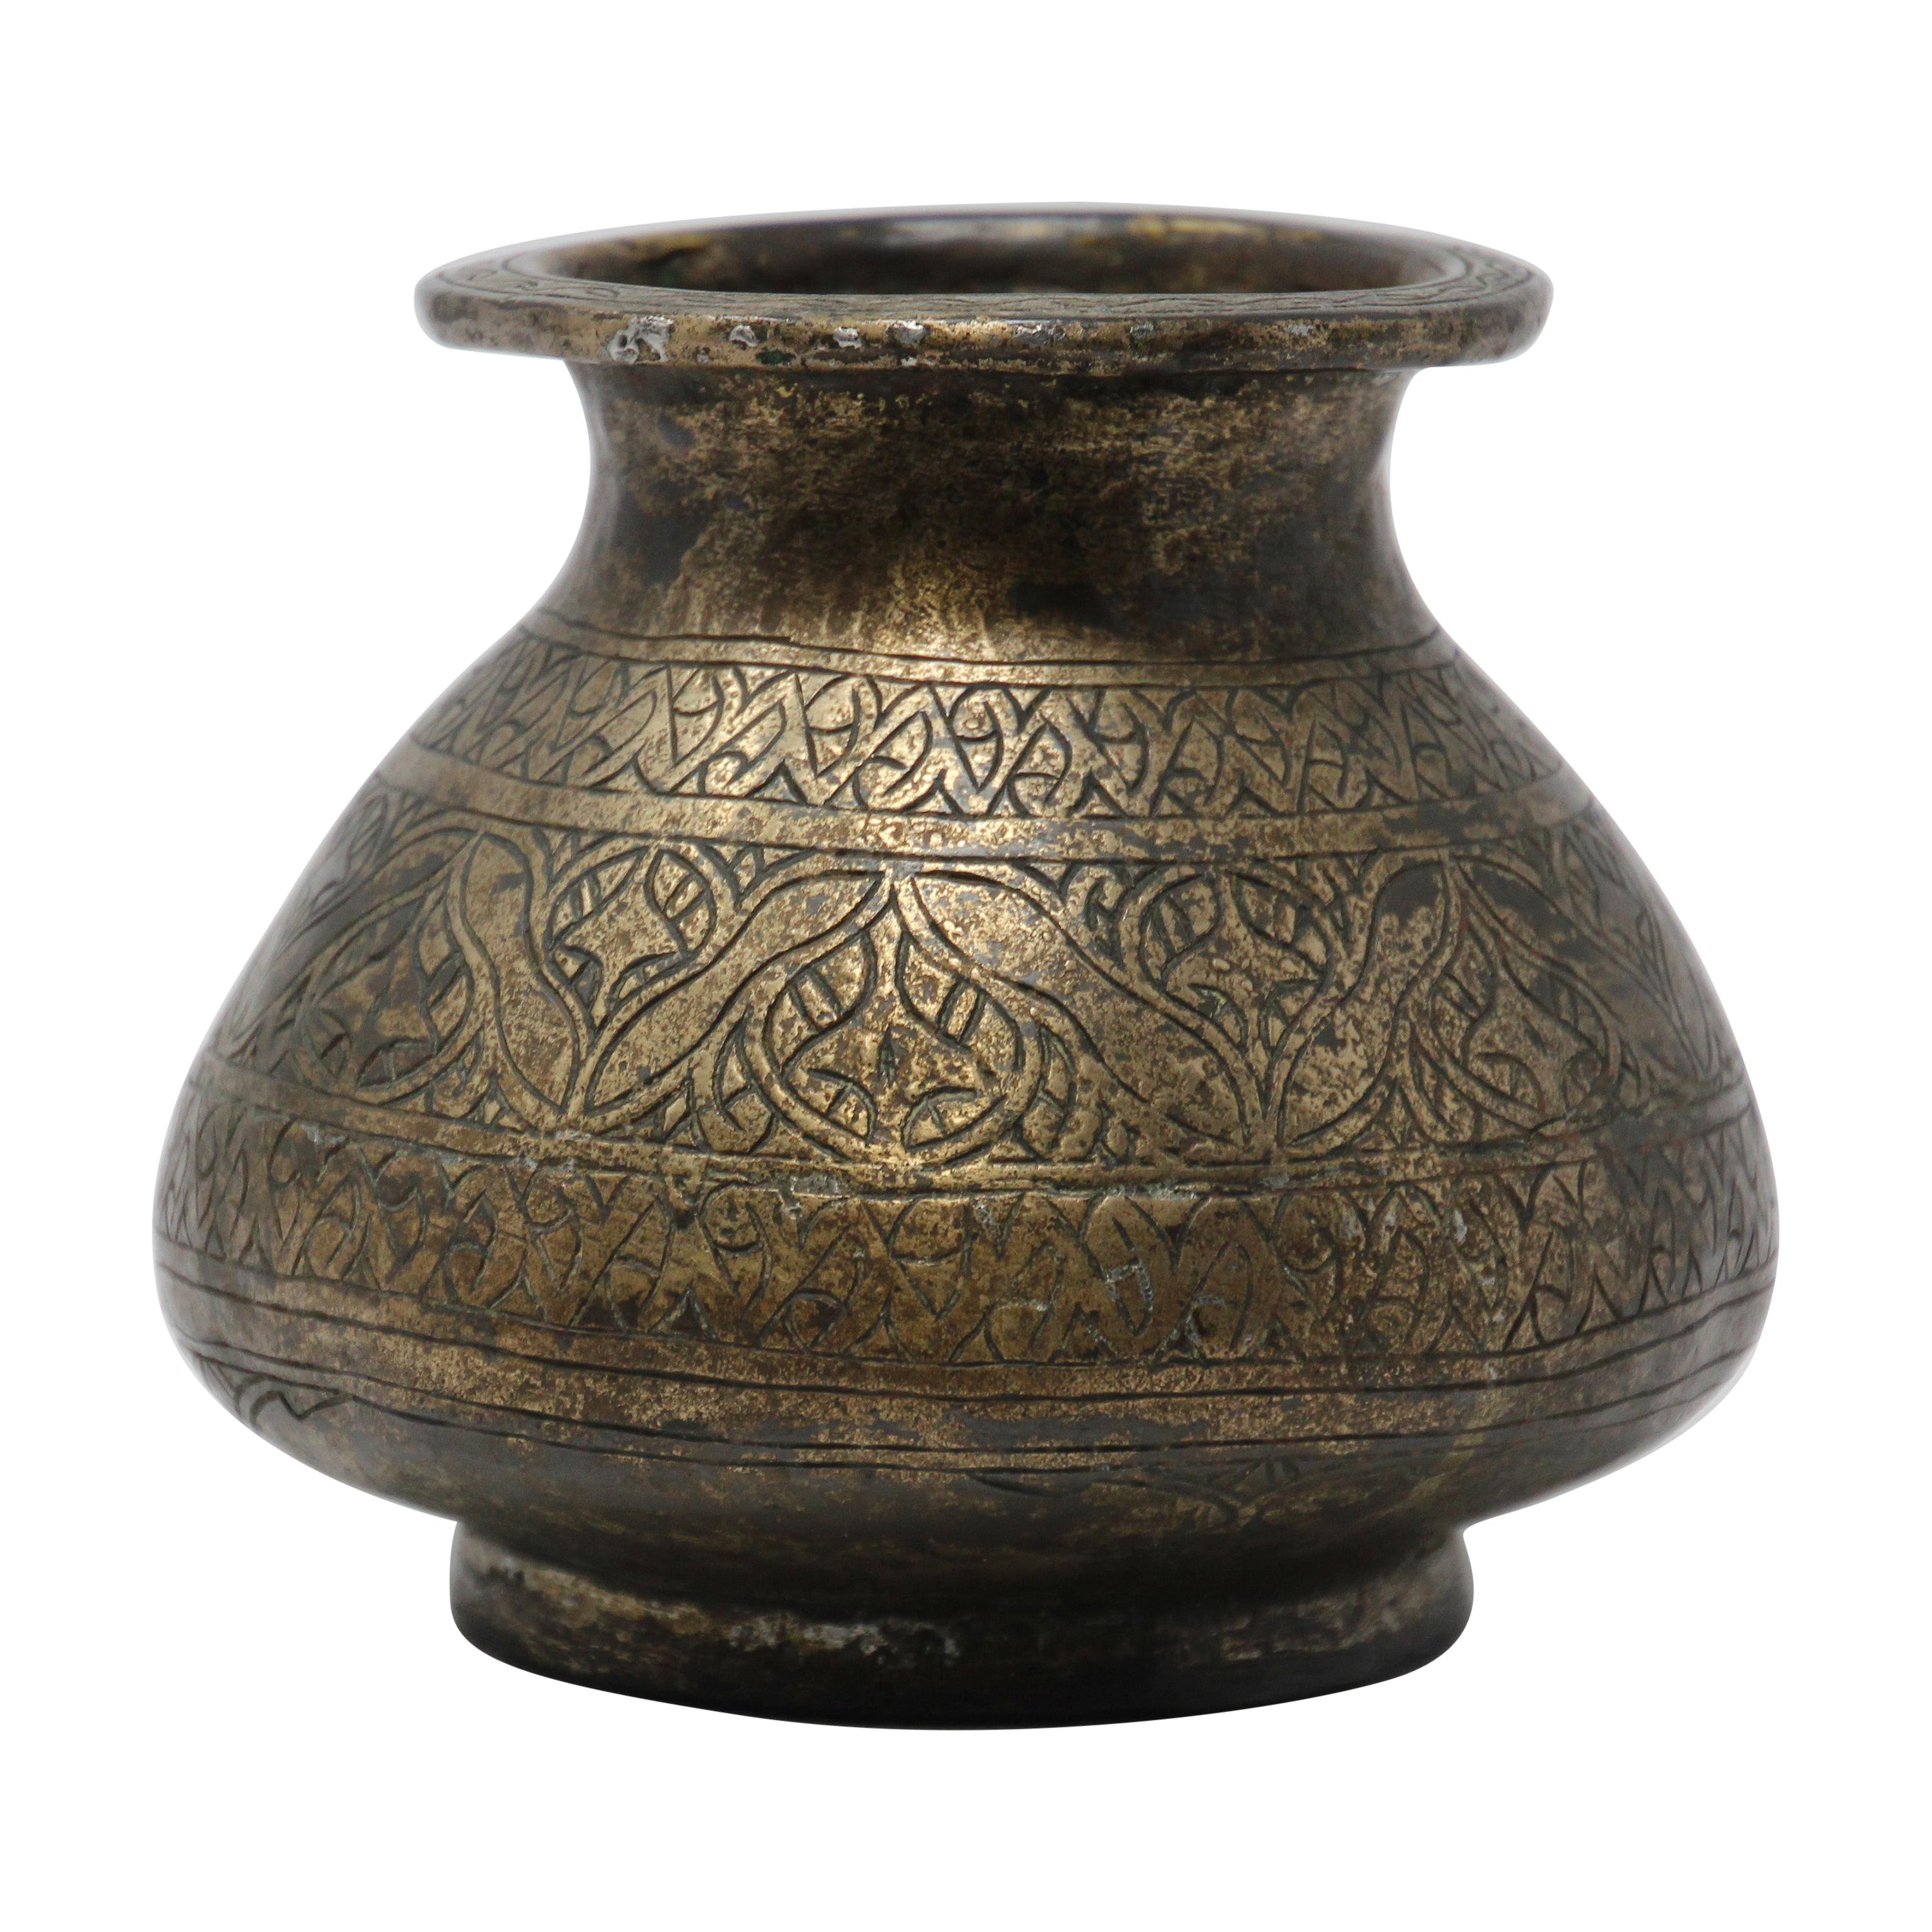 Antique Hand-Hammered Bronze Ceremonial Pot " Lota" from India